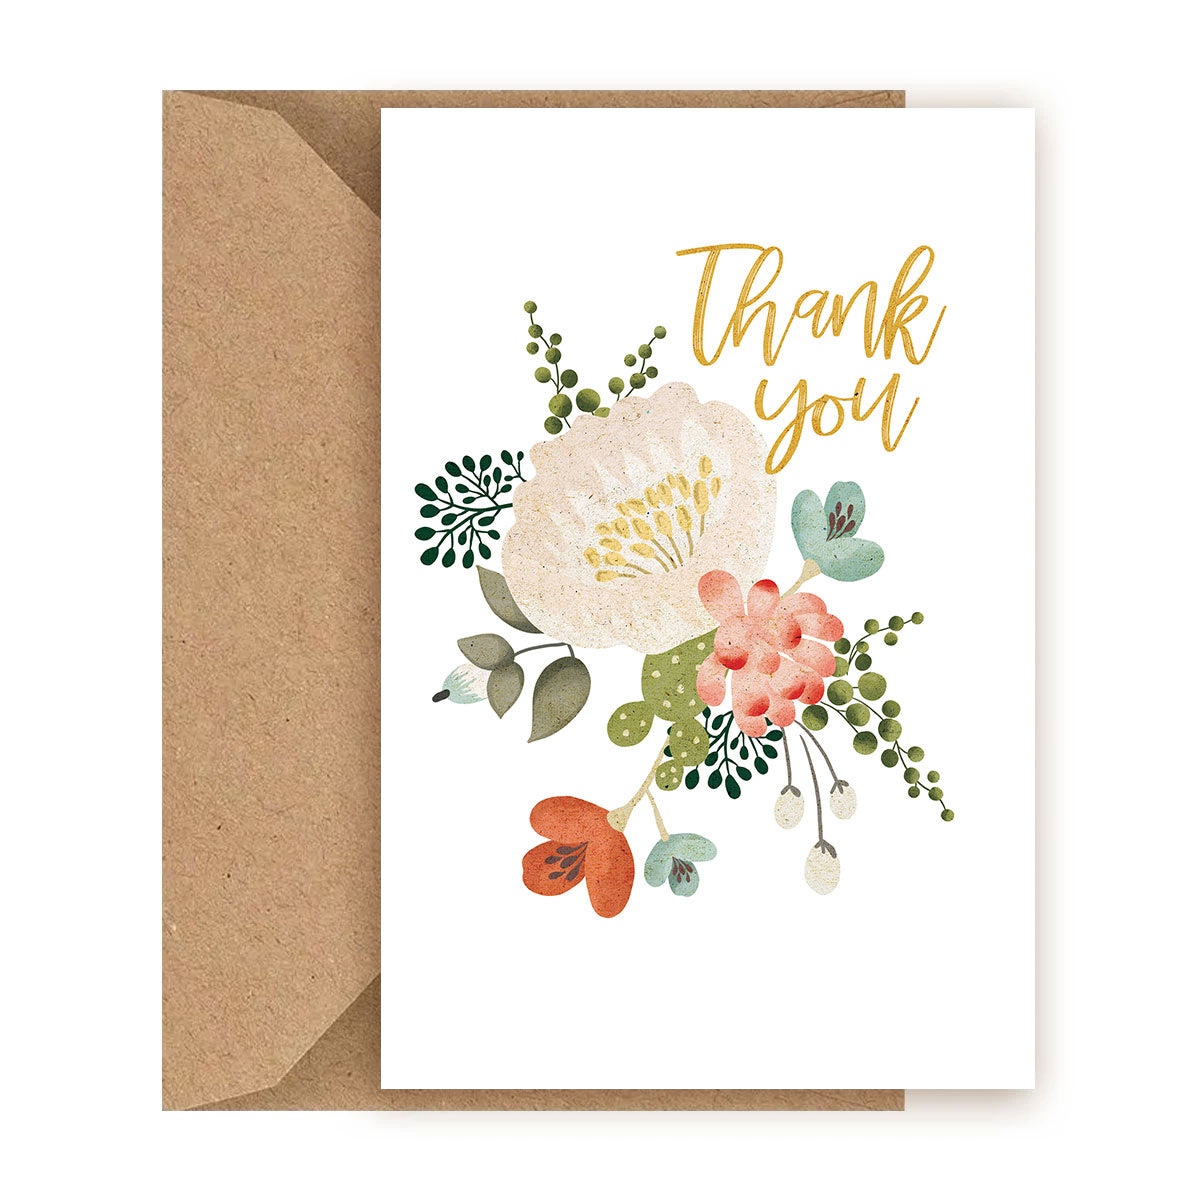 Thank You Card for sale, Succulent Happy Birthday Card for sale, Cactus Greeting Card, Succulents Greeting Card, Succulents Gift Ideas